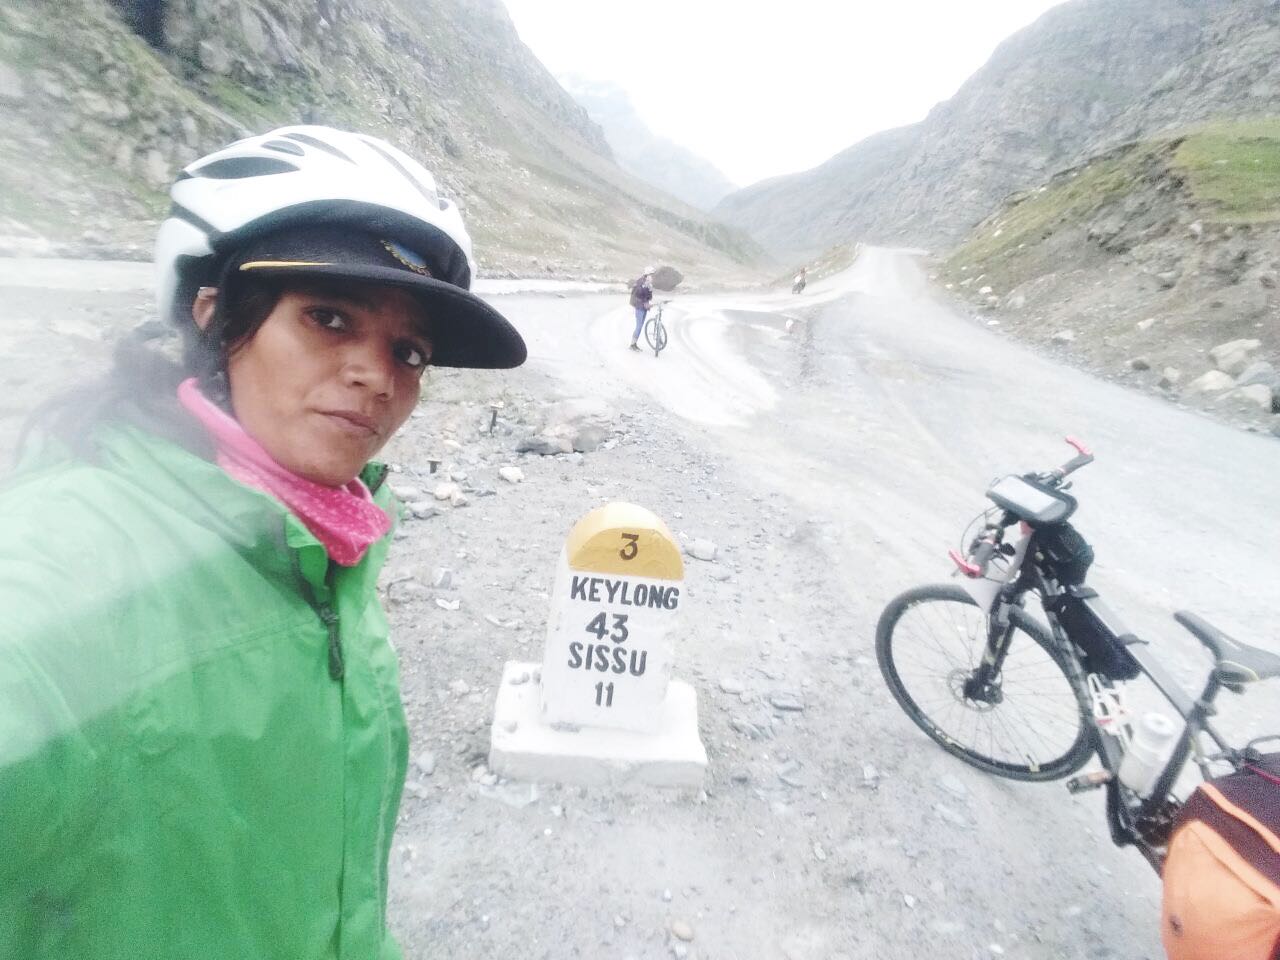 Bad road conditions- challenging for Sunitas bike